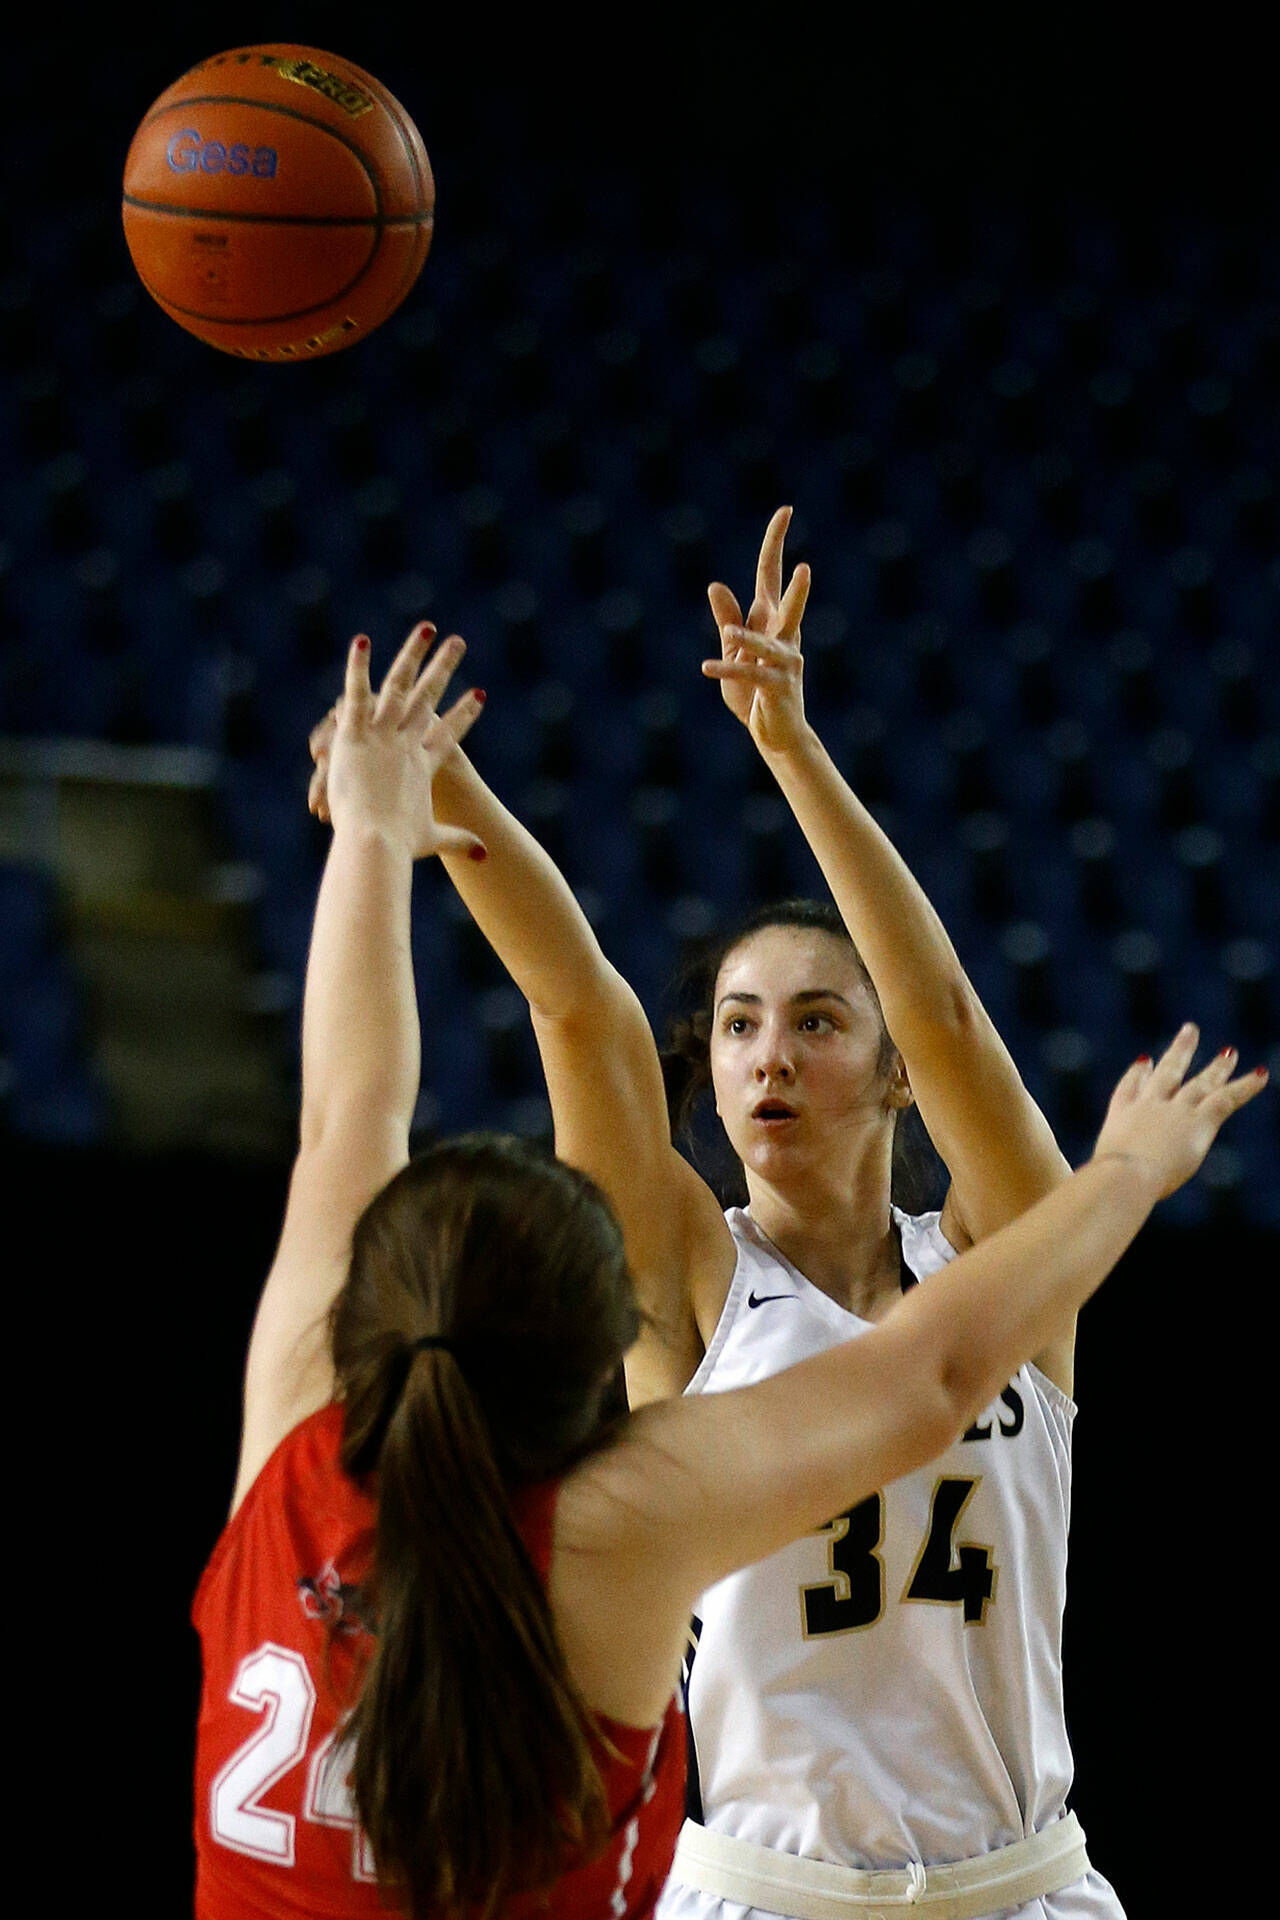 Jenna Villa hit three 3-pointers and led the Eagles with 14 points. (Ryan Berry / The Herald)